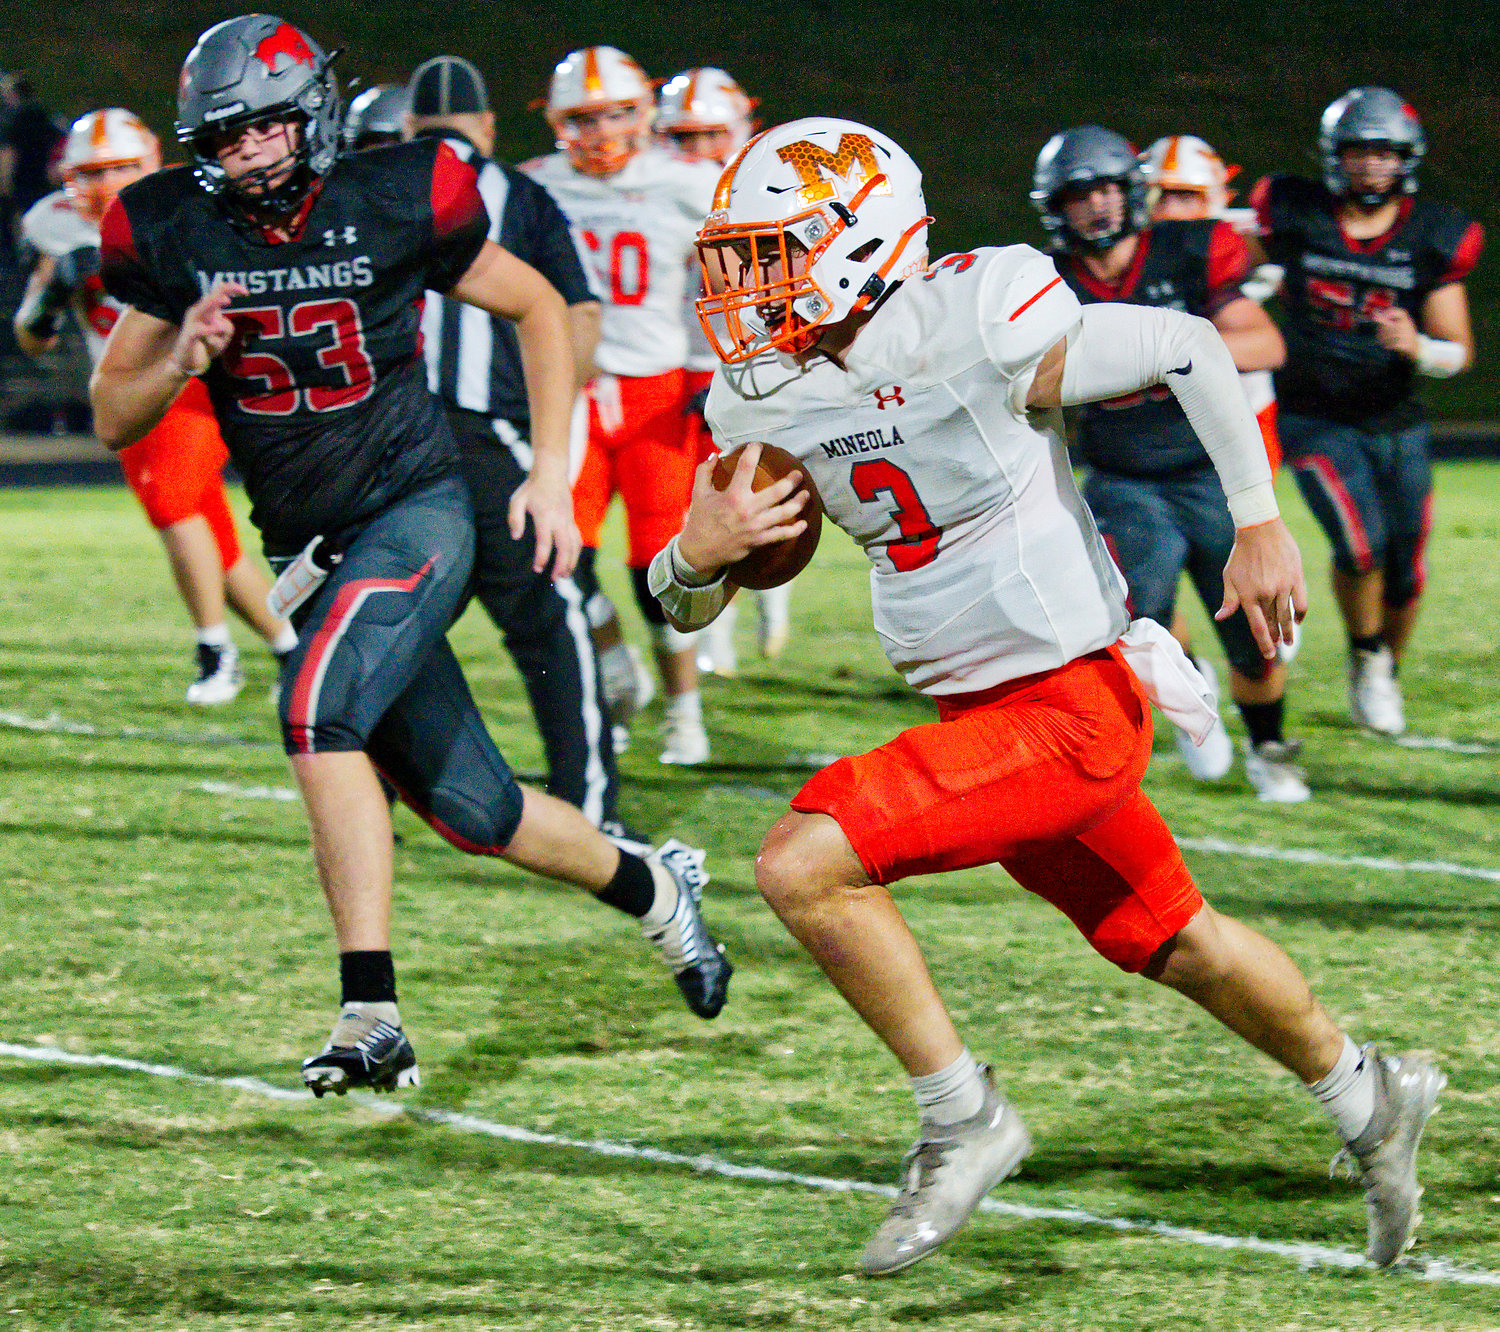 TJ Moreland sprints toward the end zone for a Mineola touchdown.